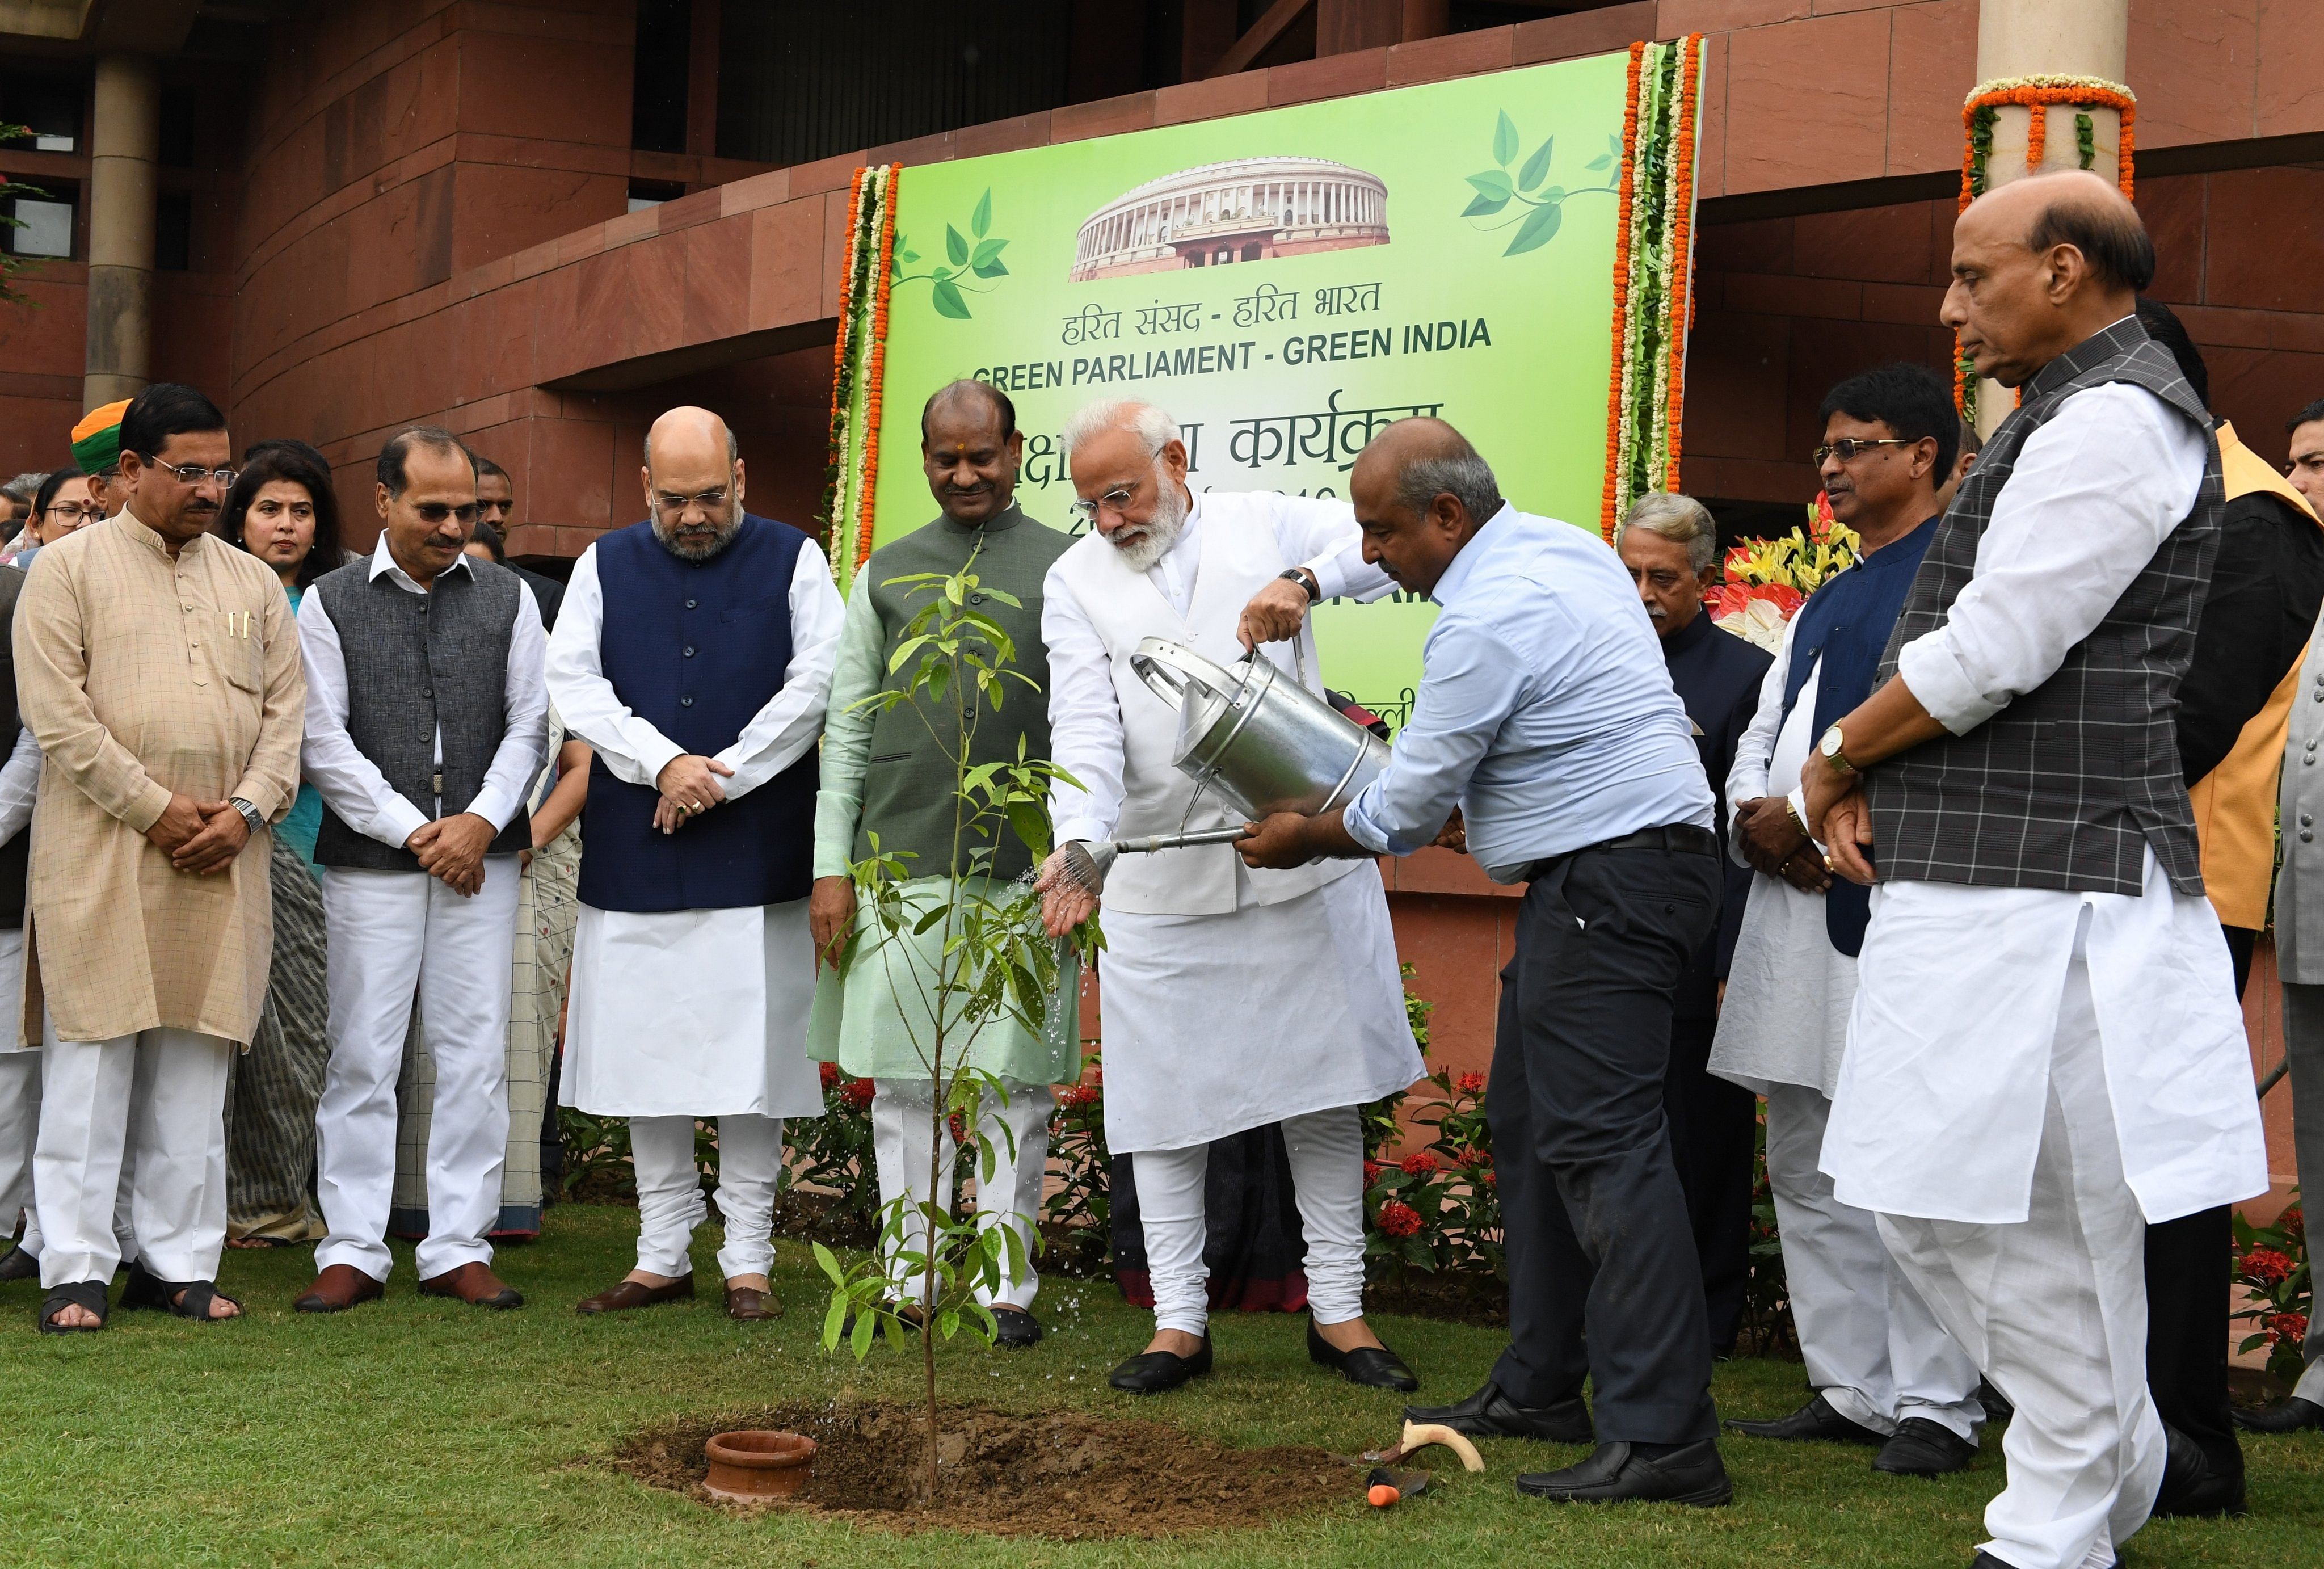 Modi, along with others, planted saplings during the drive. (PIB India/Twitter)